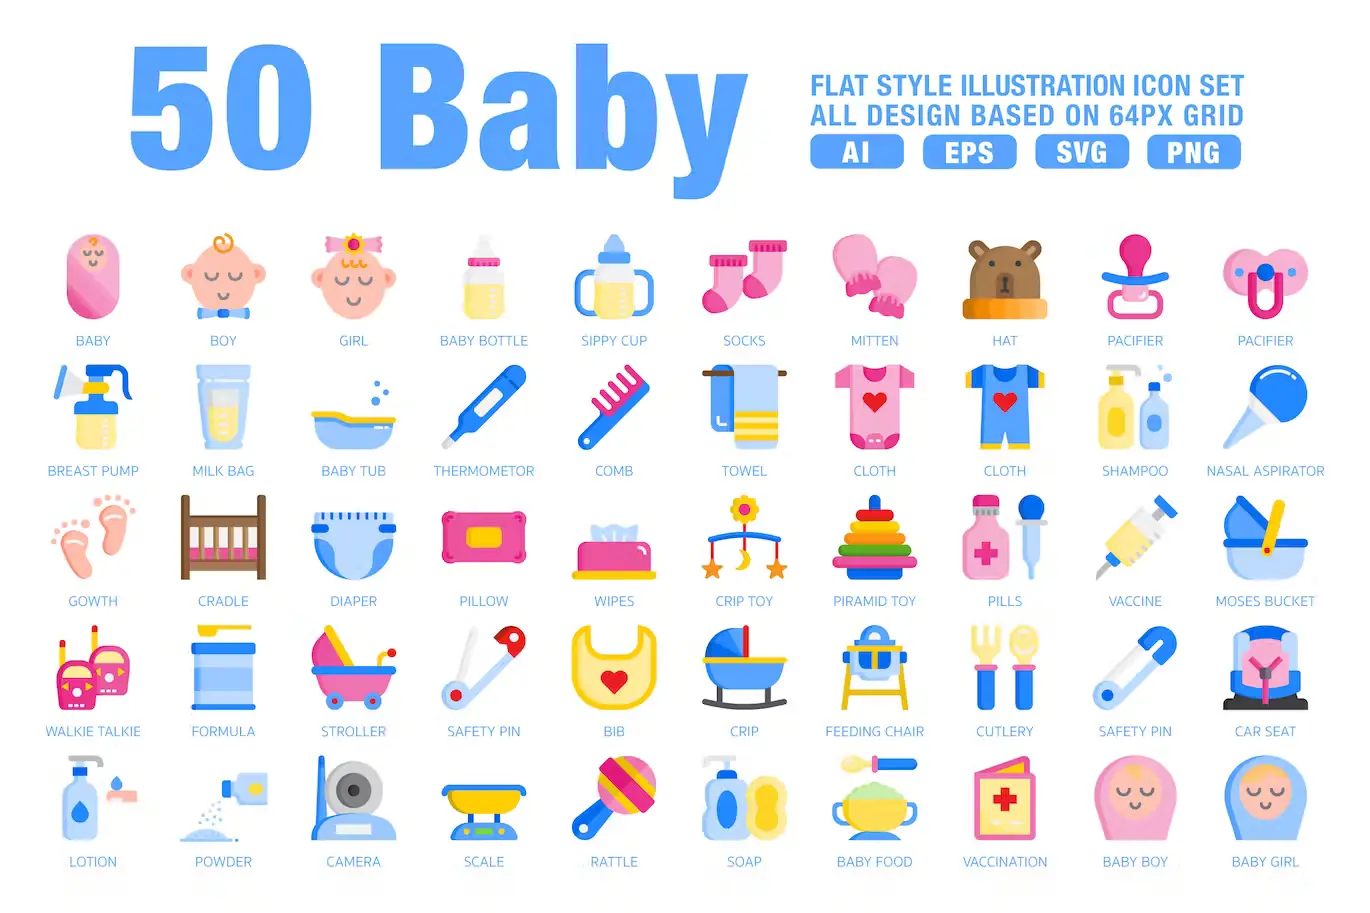 50 Baby Flat Style Icons